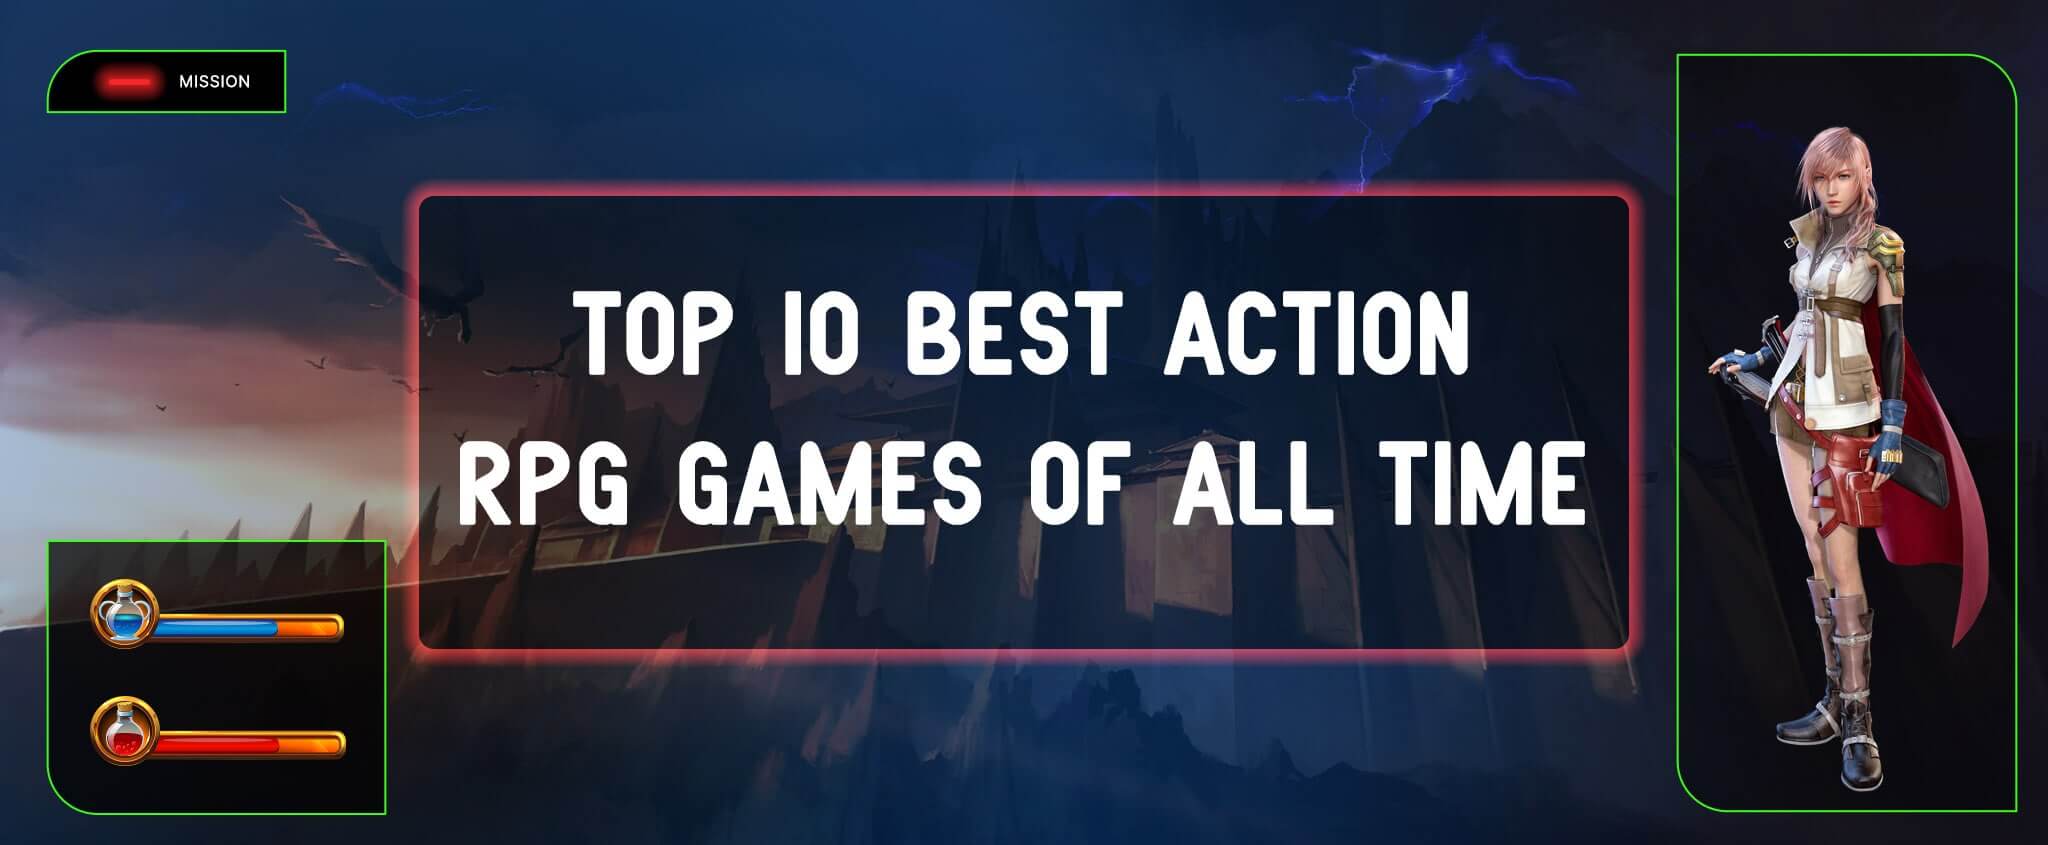 Top 10 BEST .io Games of All Time! 